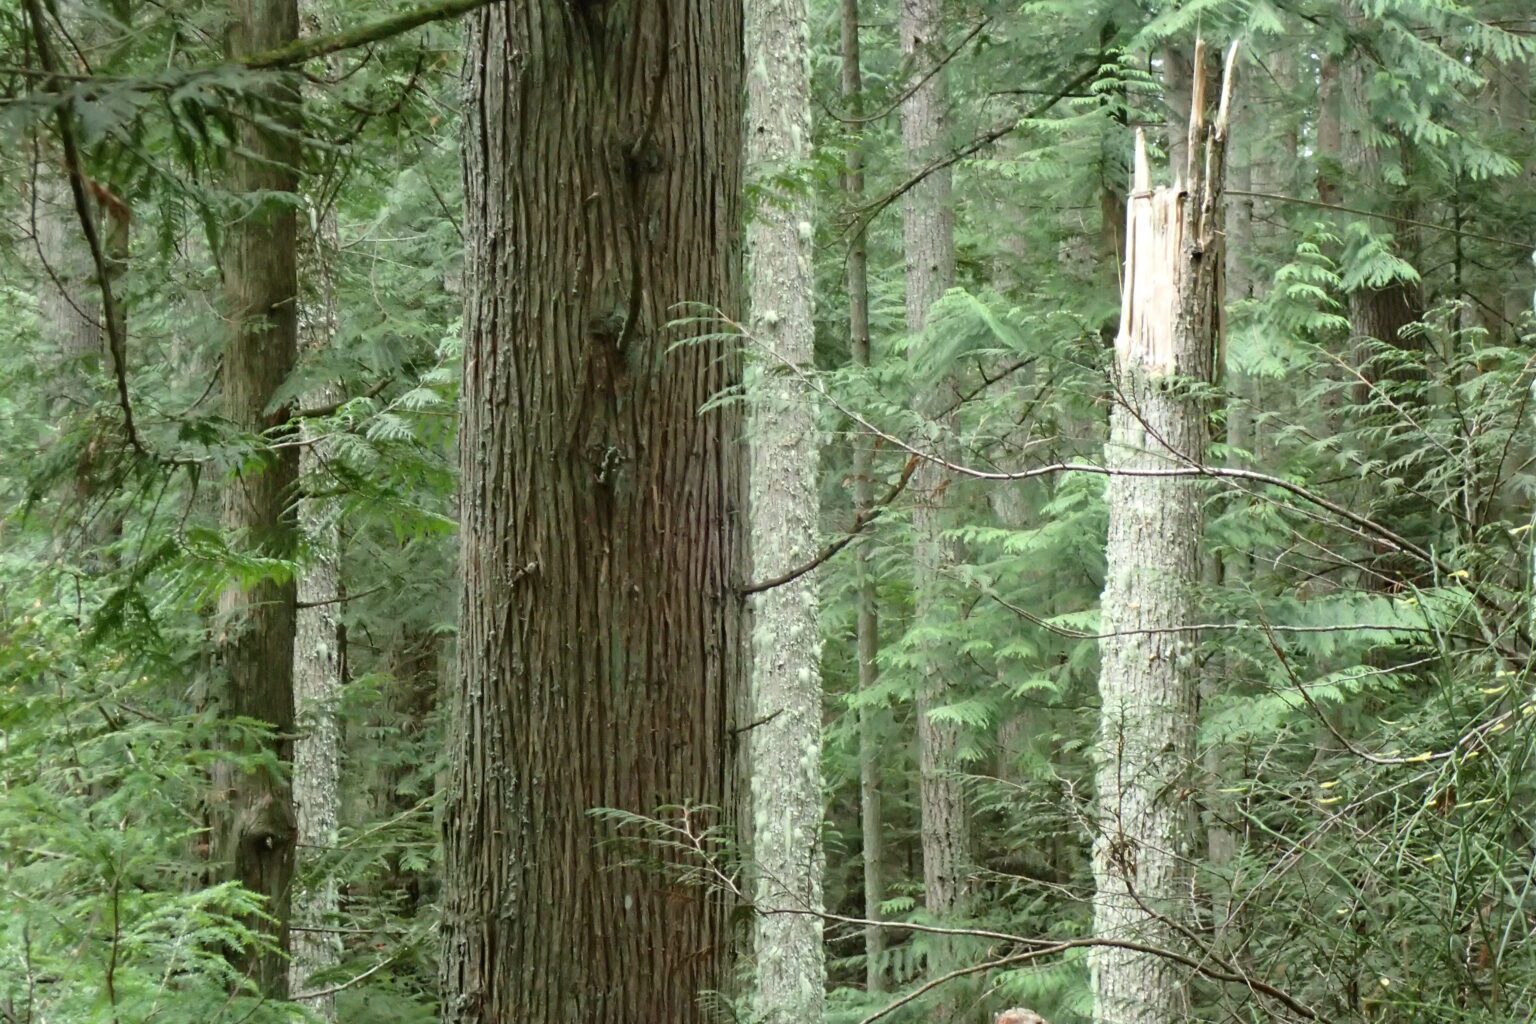 A stand of "nearly-old-growth trees" in the Bessie forest